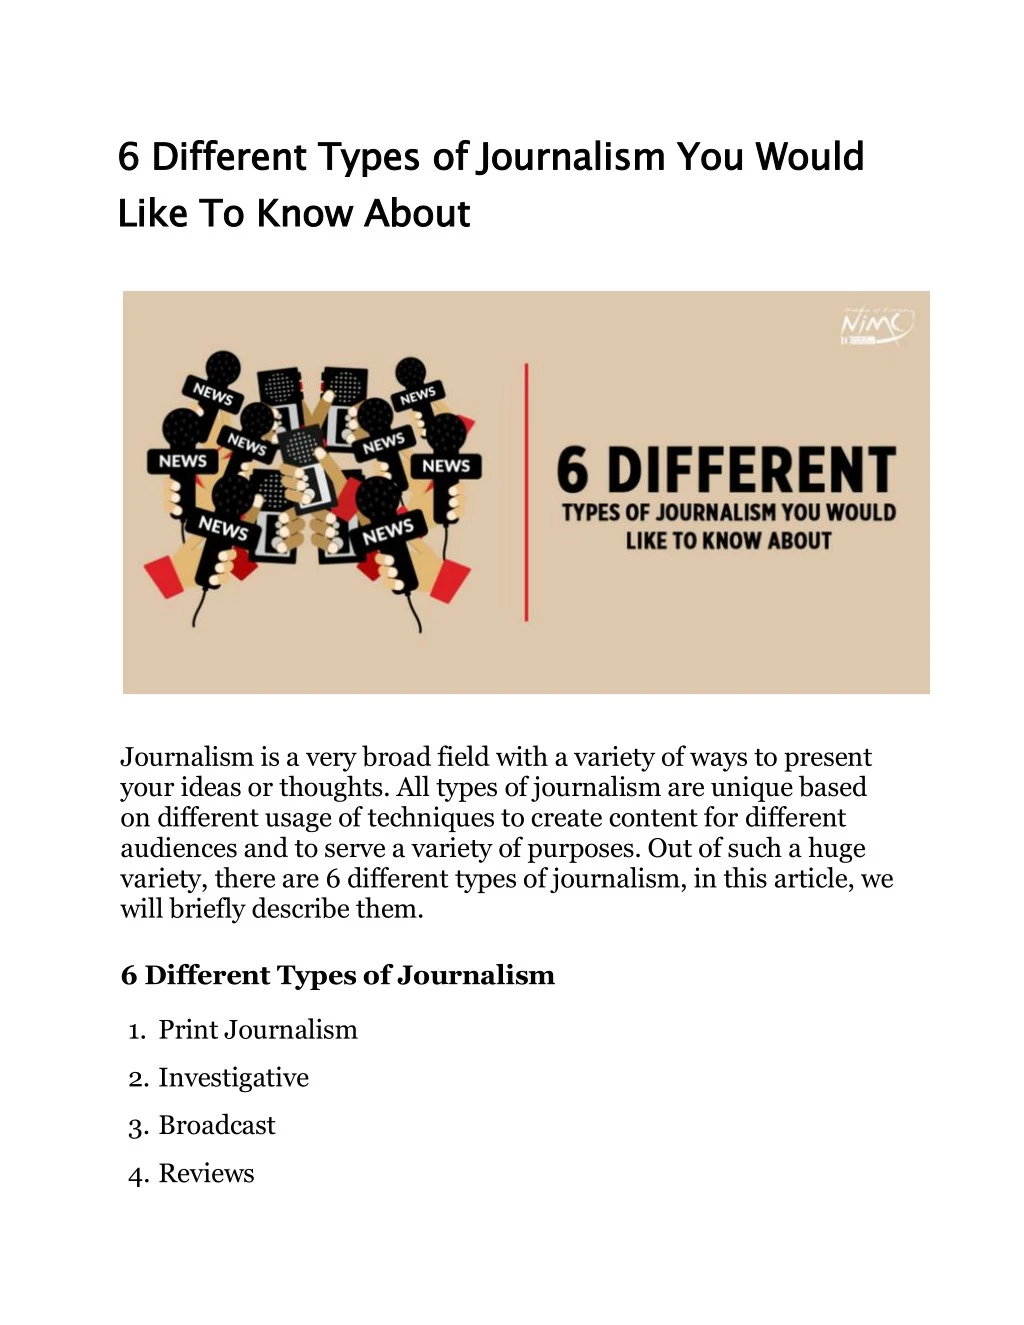 6 different types of journalism you would like